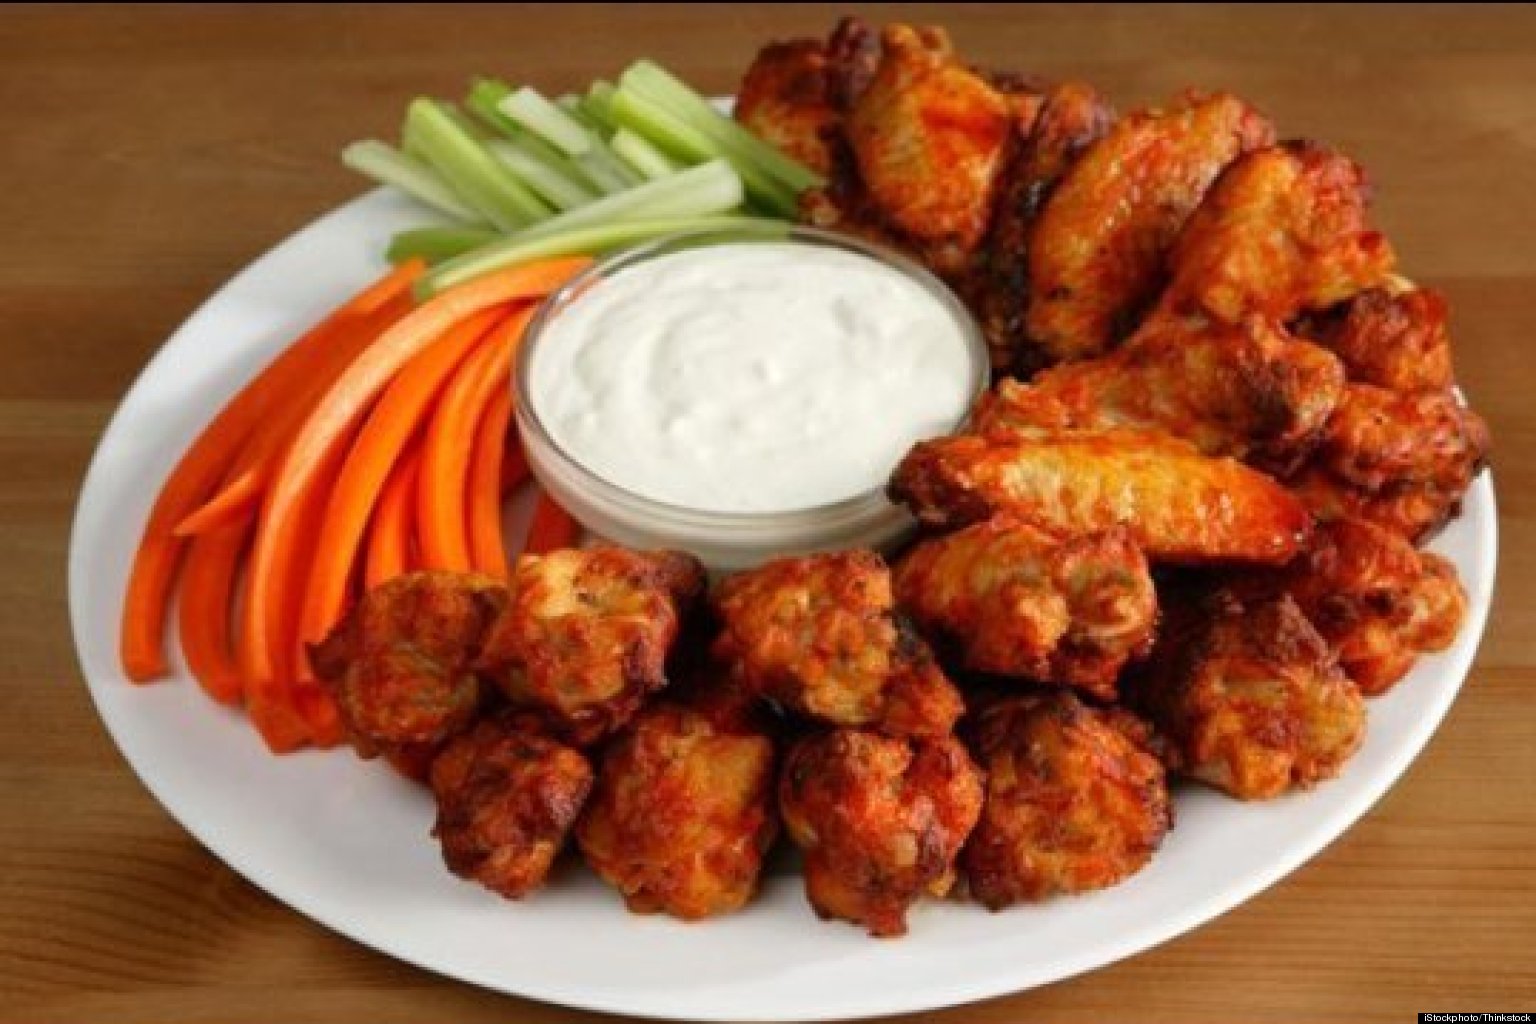 How To Make The Ultimate Buffalo Wing | The Daily Meal